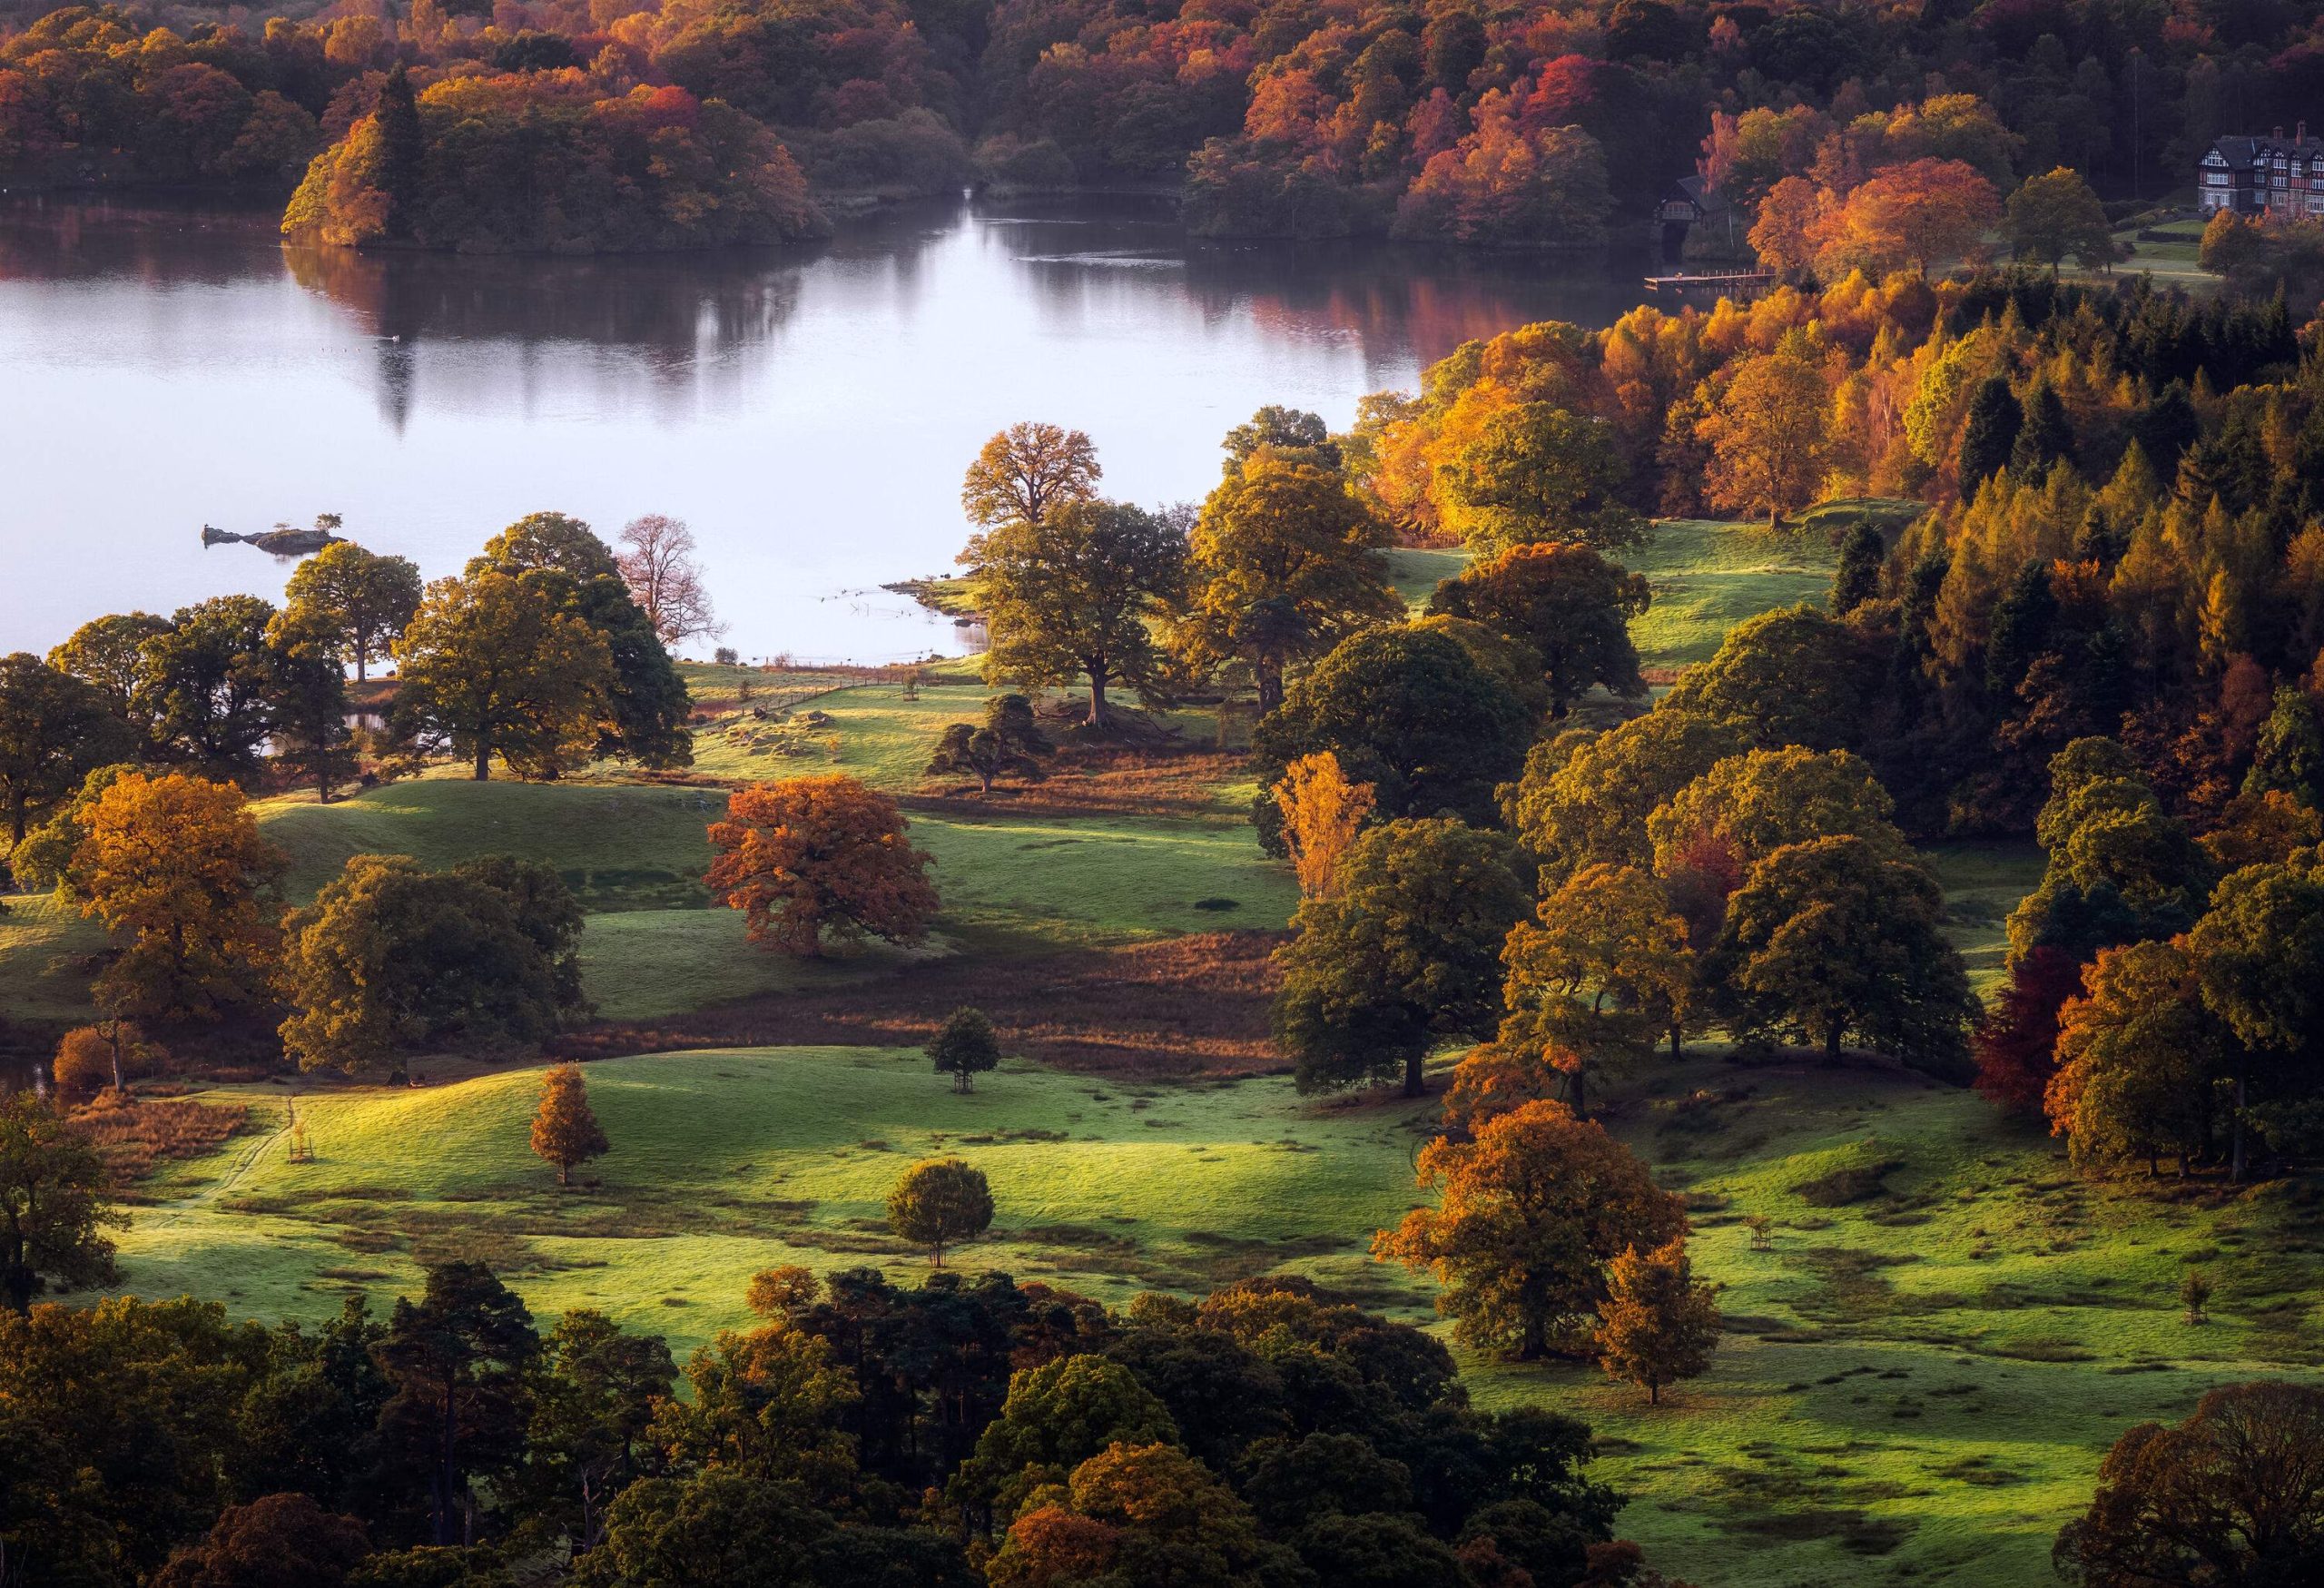 Autumnal trees in full colour on a meadow next to a lake.